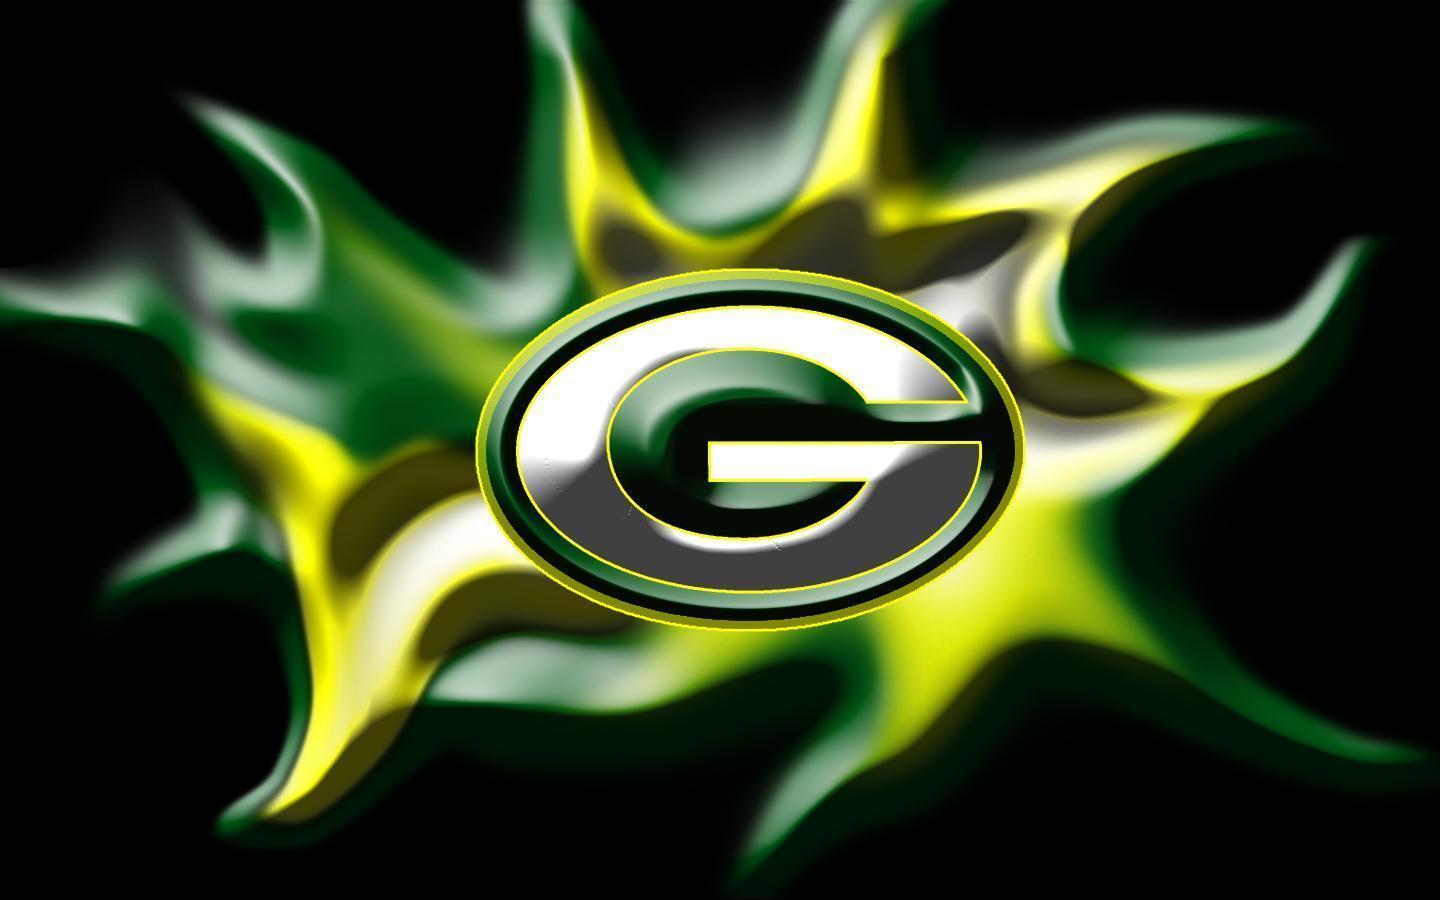 Logos, Awesome and Green bay packers wallpaper